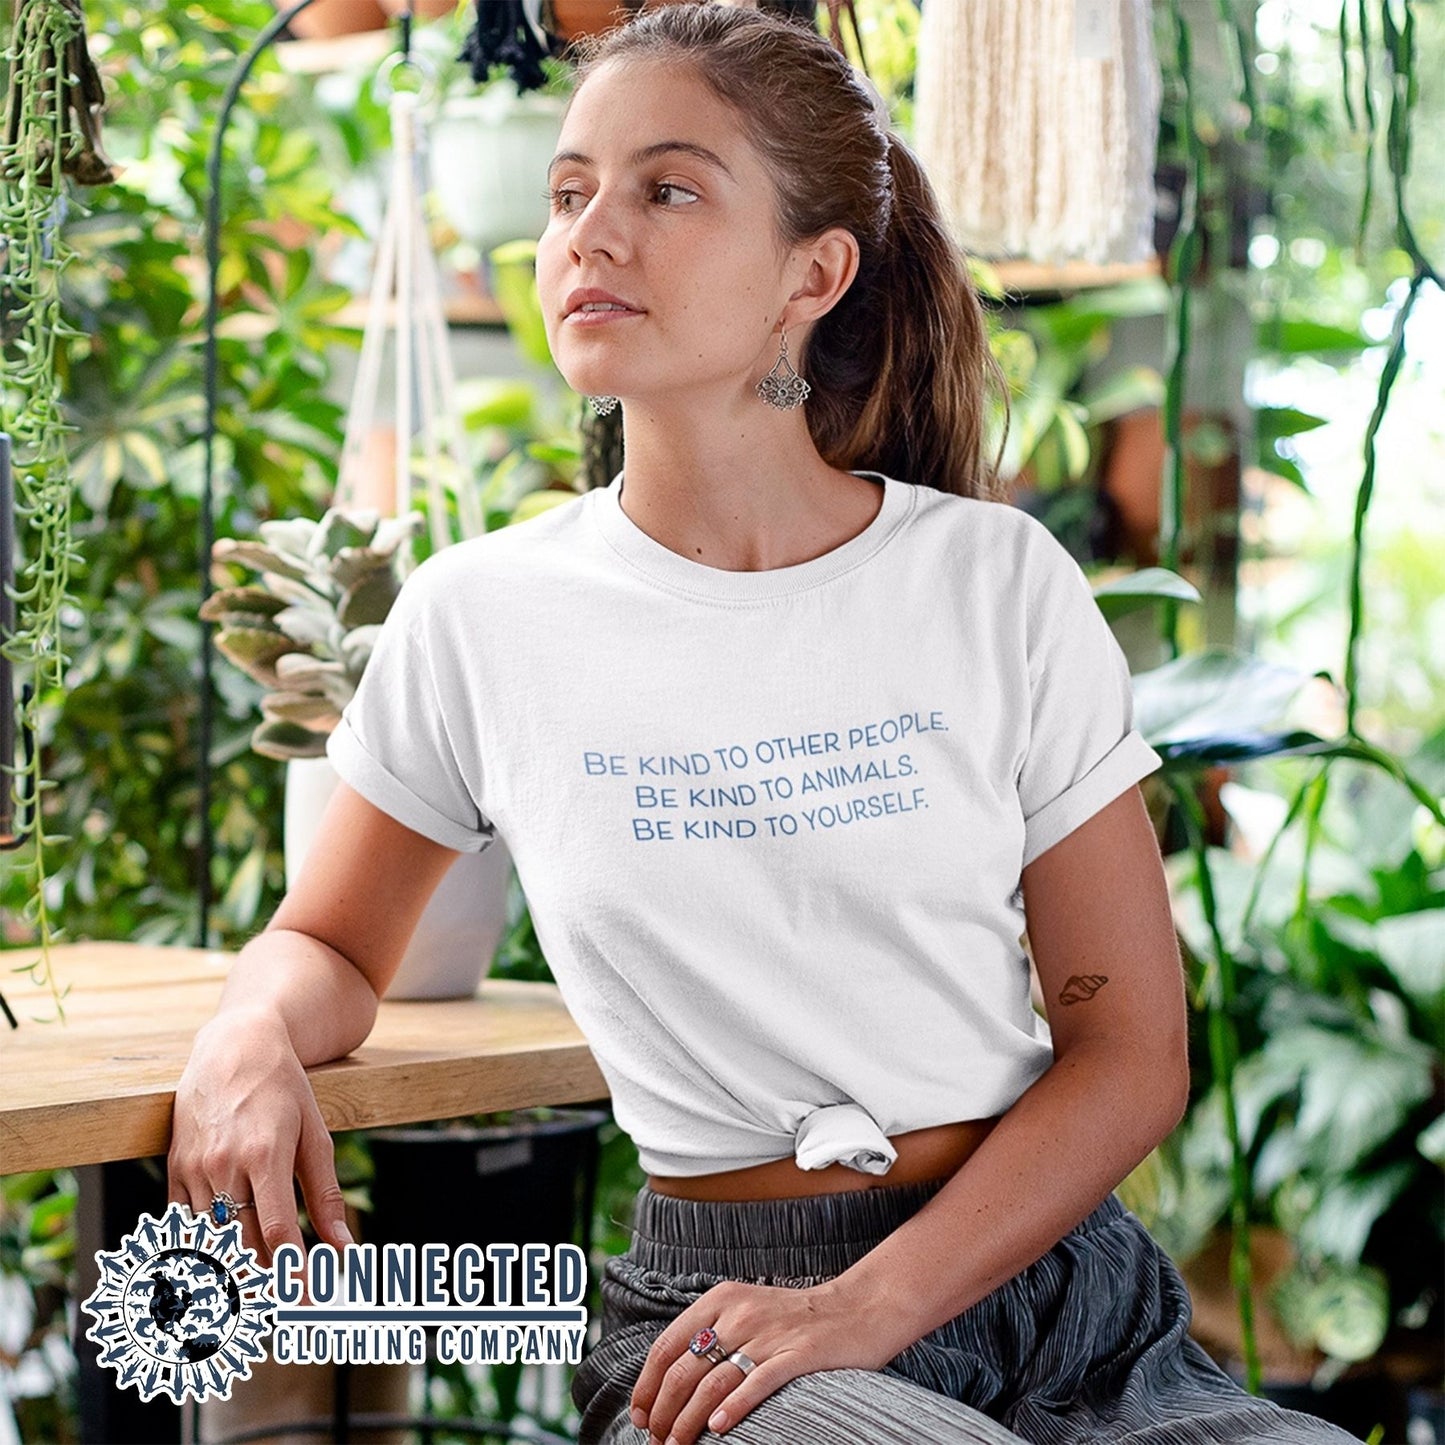 Model Wearing White Be Kind To All Short-Sleeve Tee - Connected Clothing Company - 10% of profits donated to ocean conservation